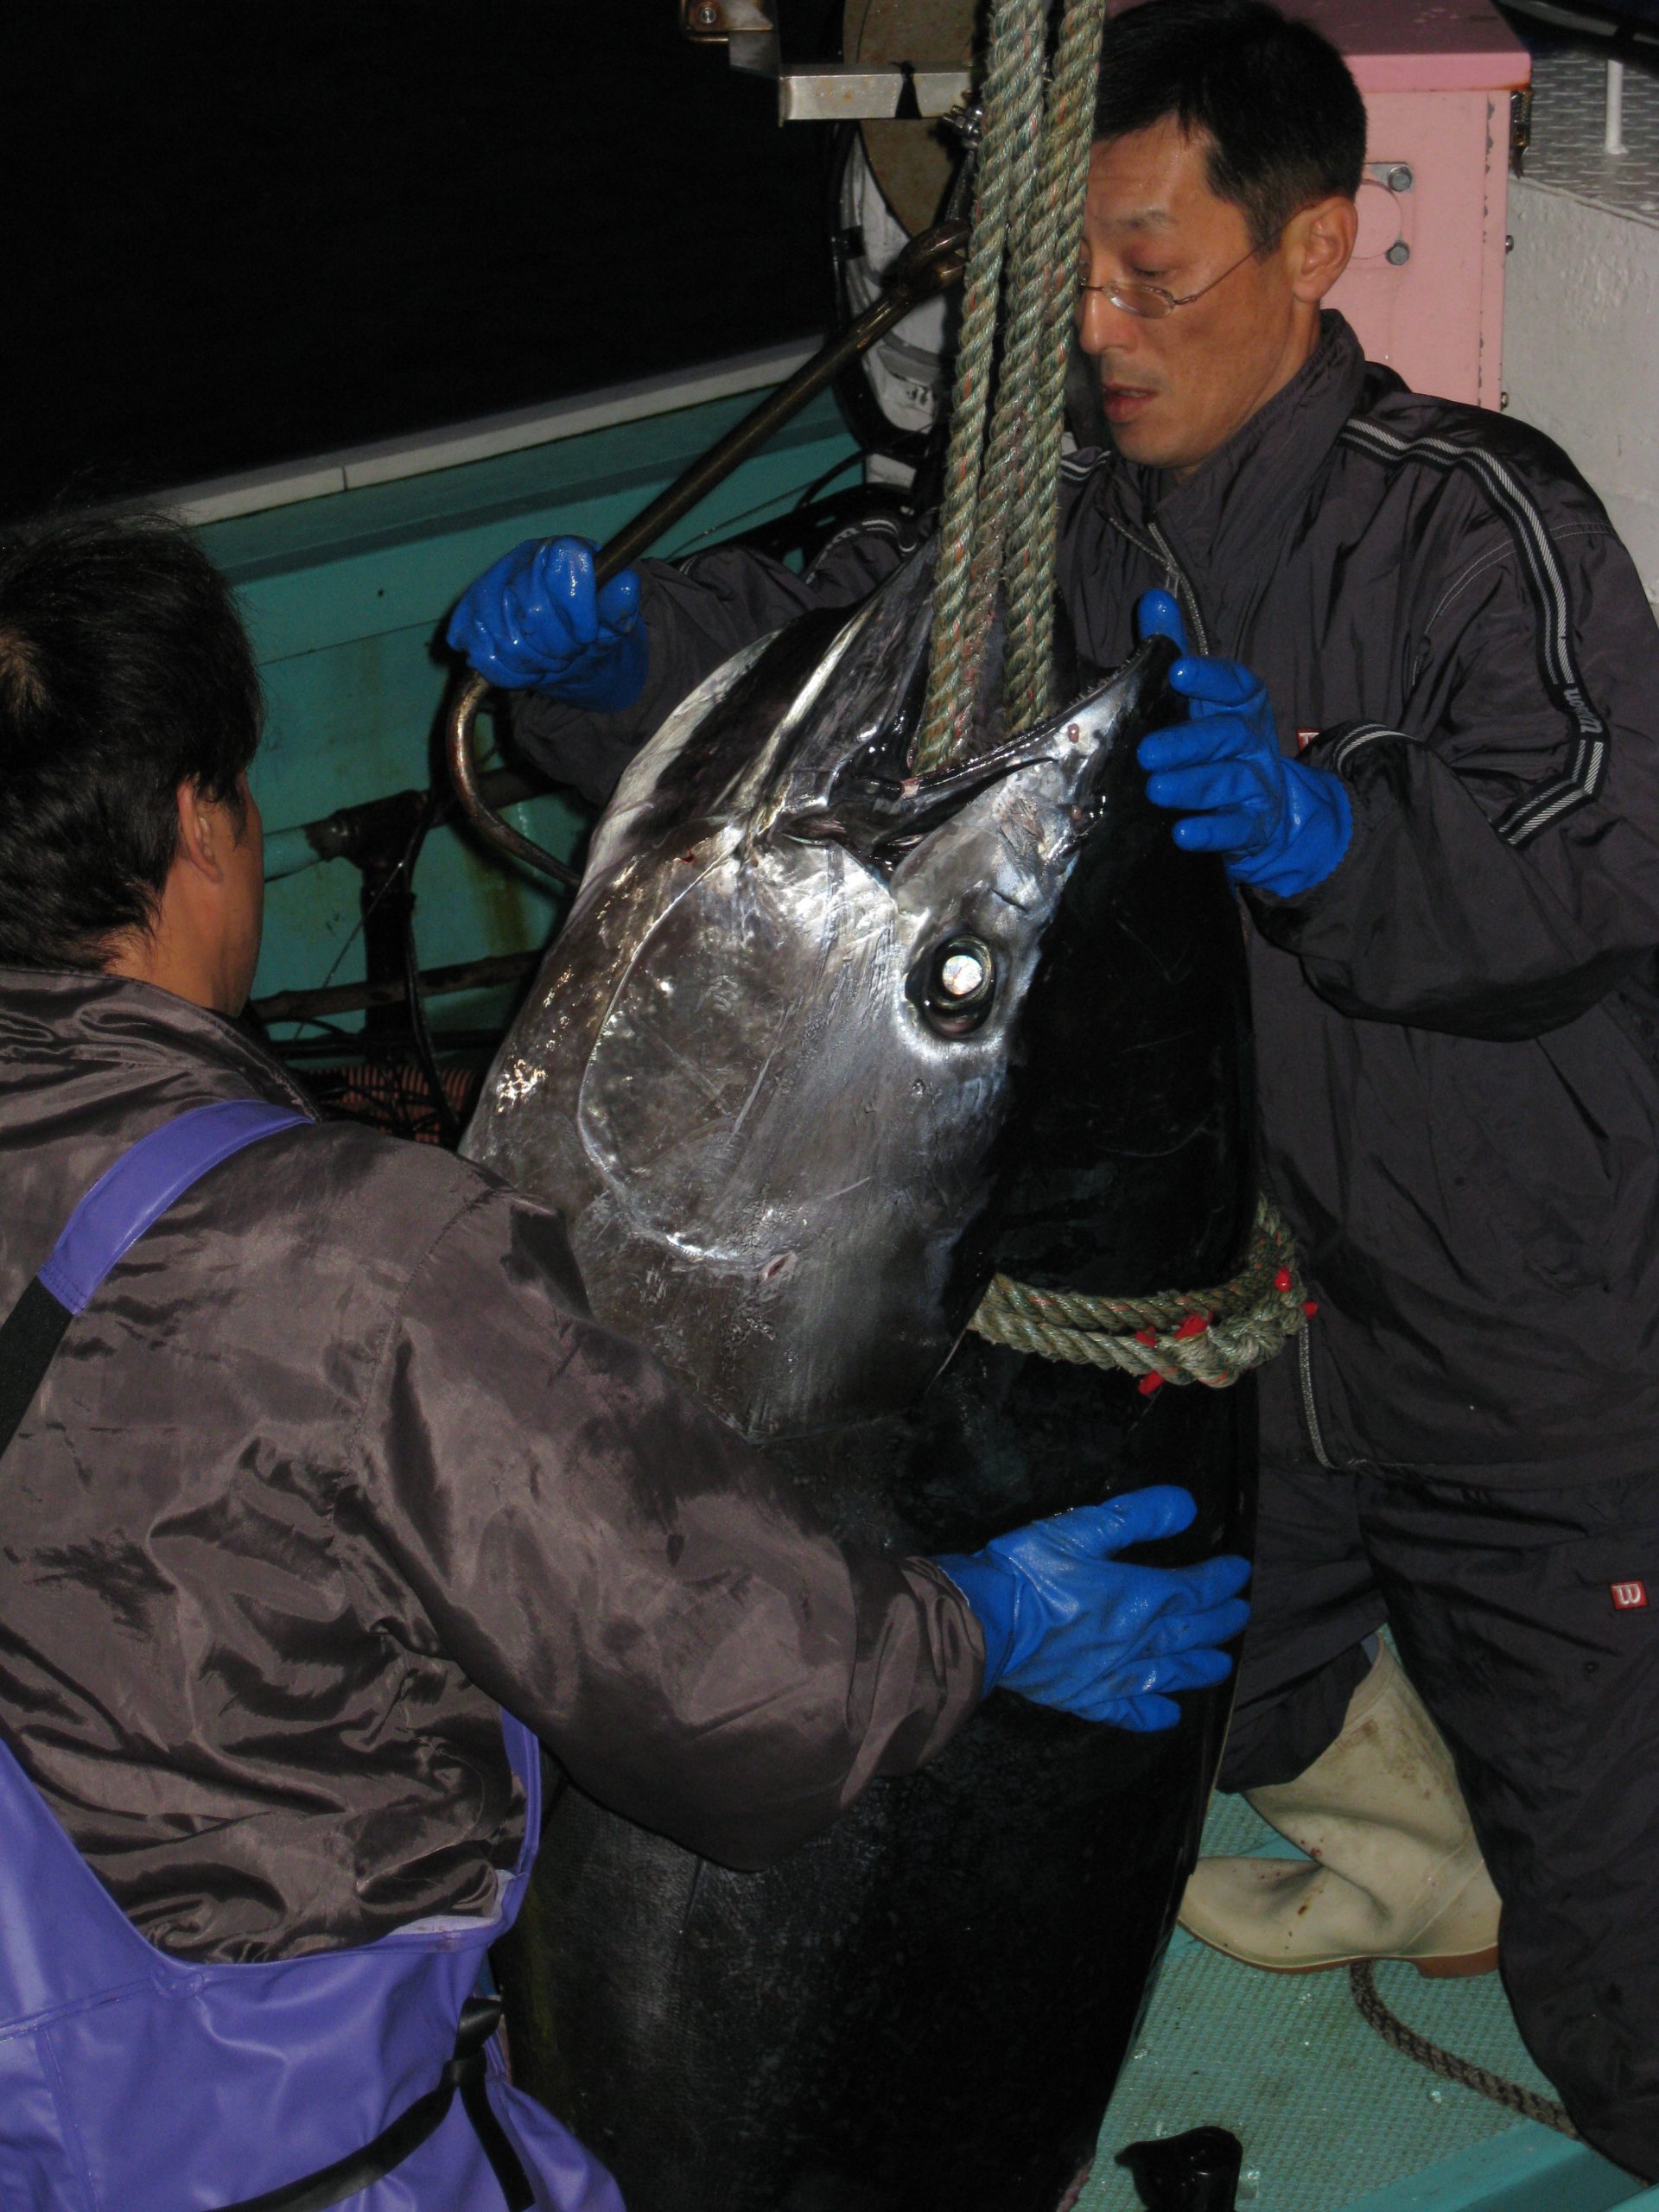 Japan’s King of Fish Faces Extinction